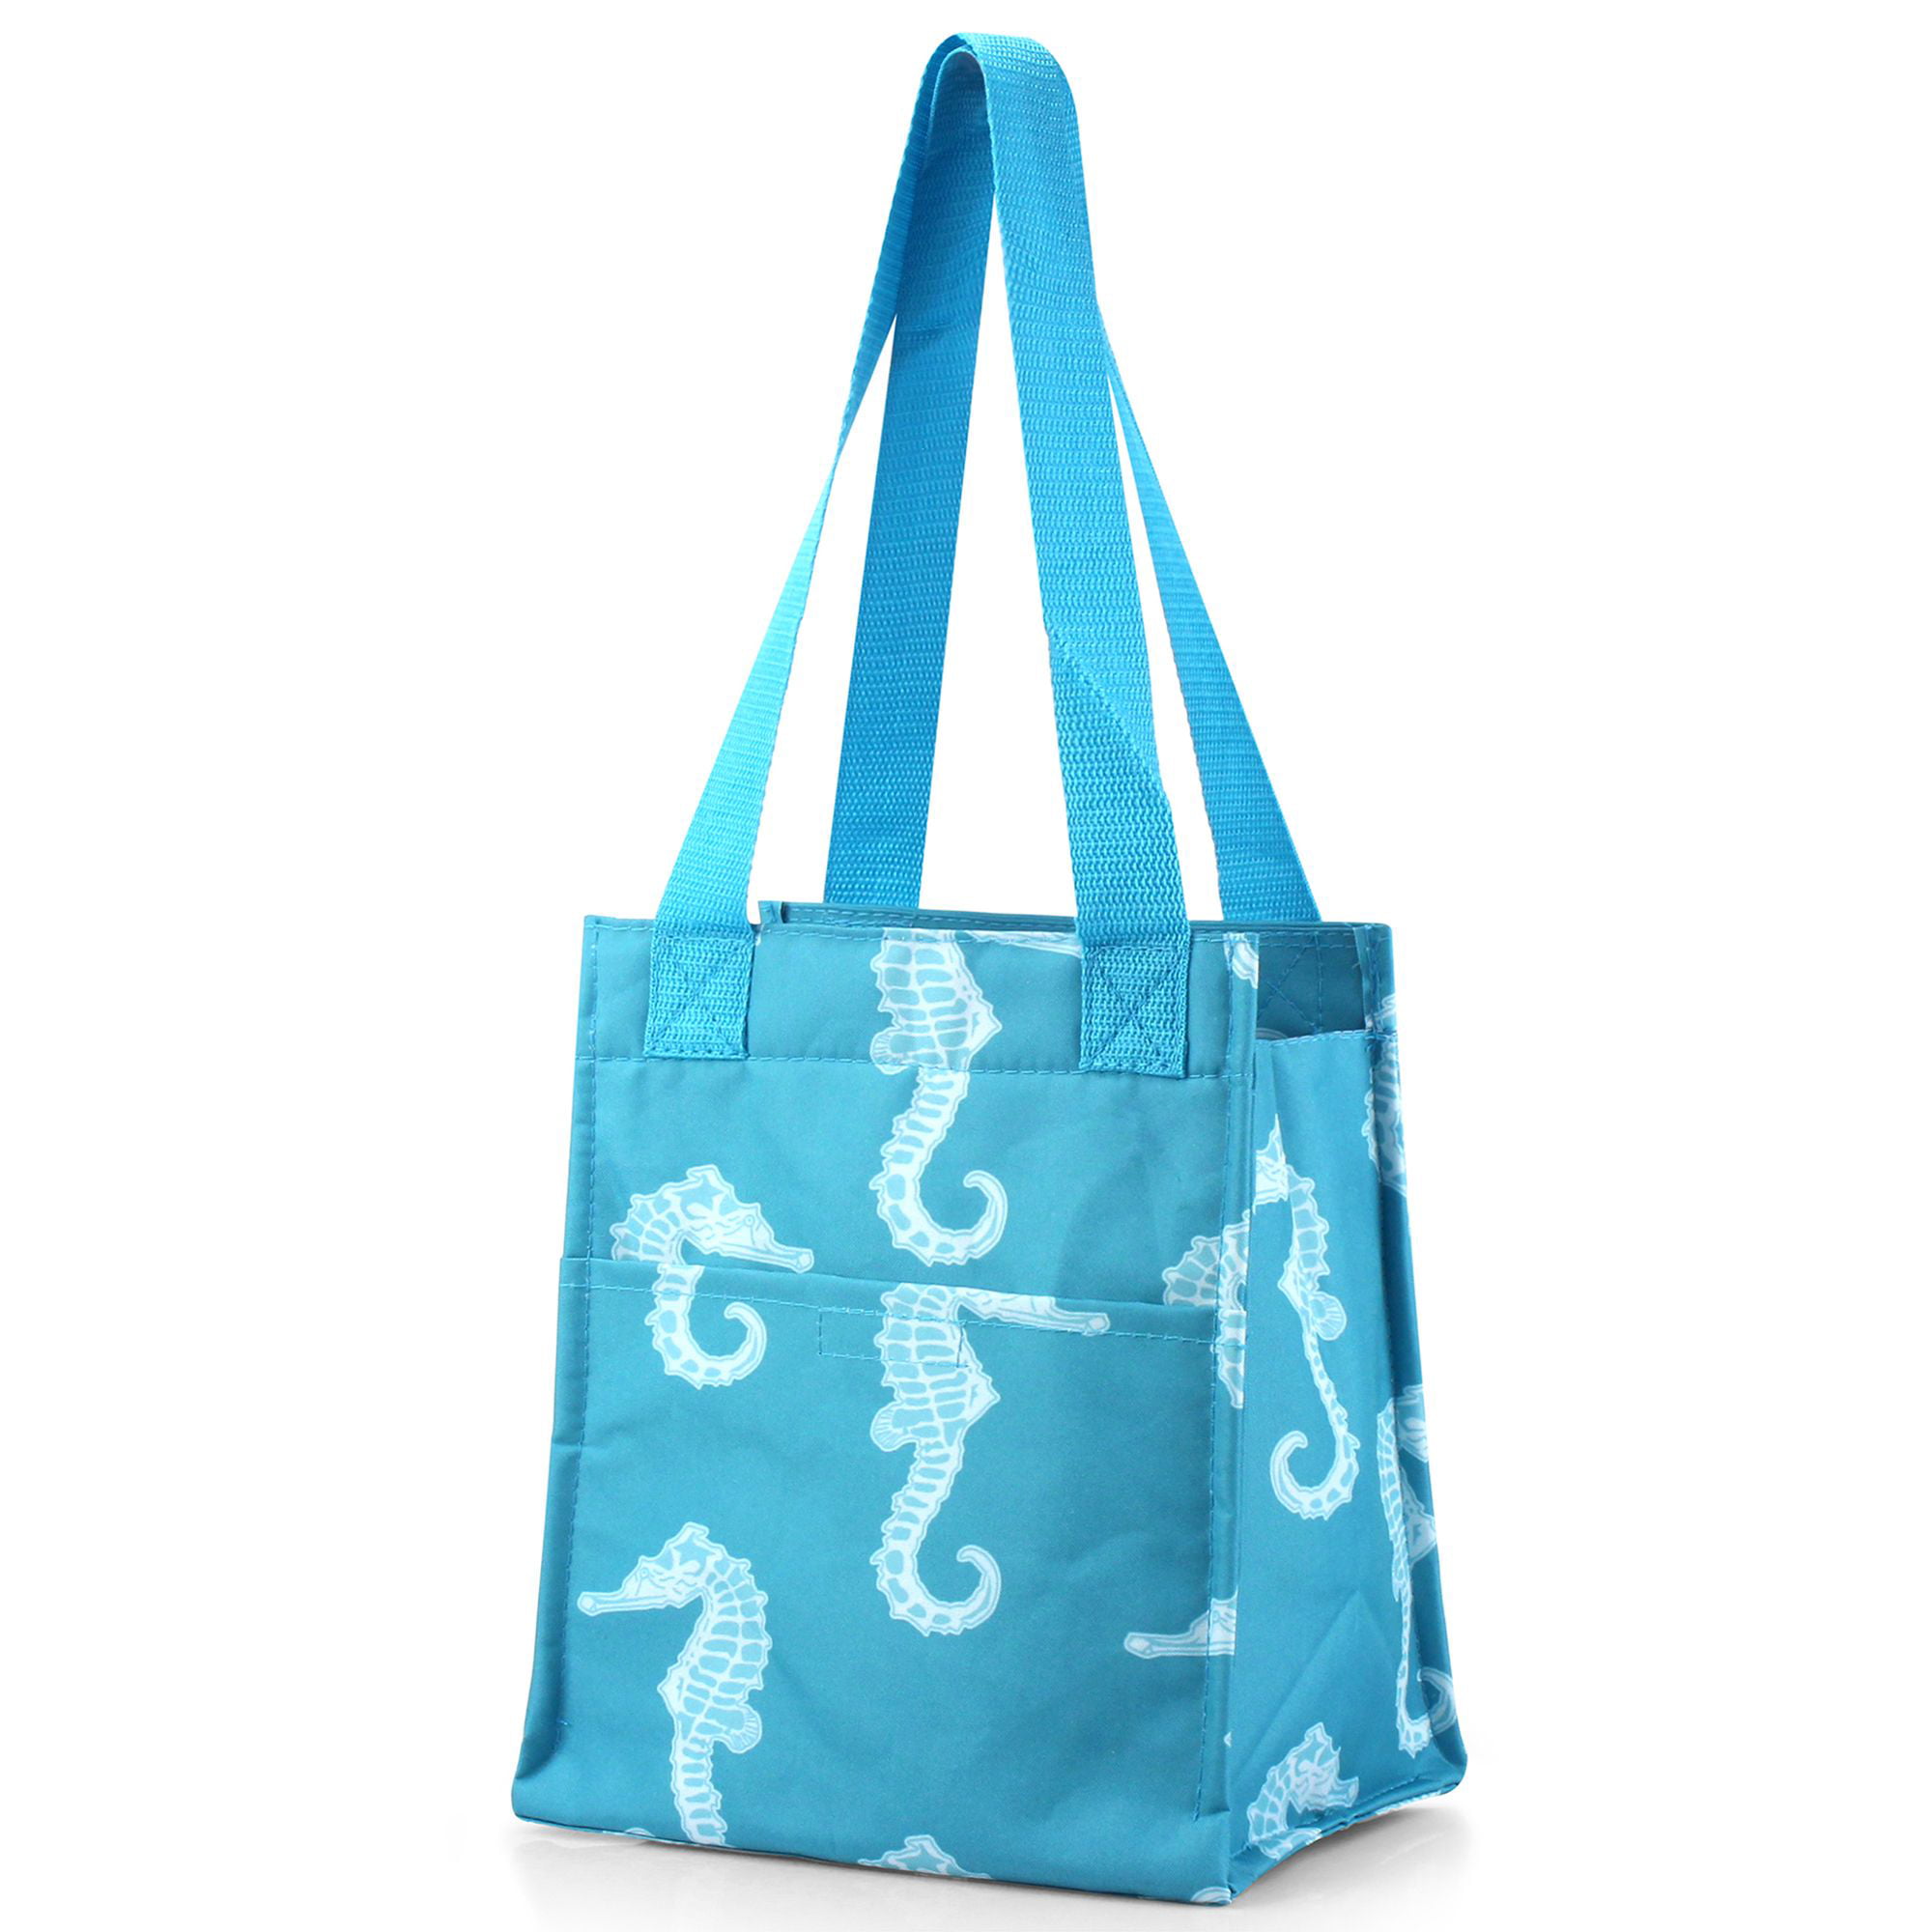 Insulated Lunch Bag by Zodaca Cooler Picnic Travel Food Box Women Tote  Zipper Carry Bags - Seahorse